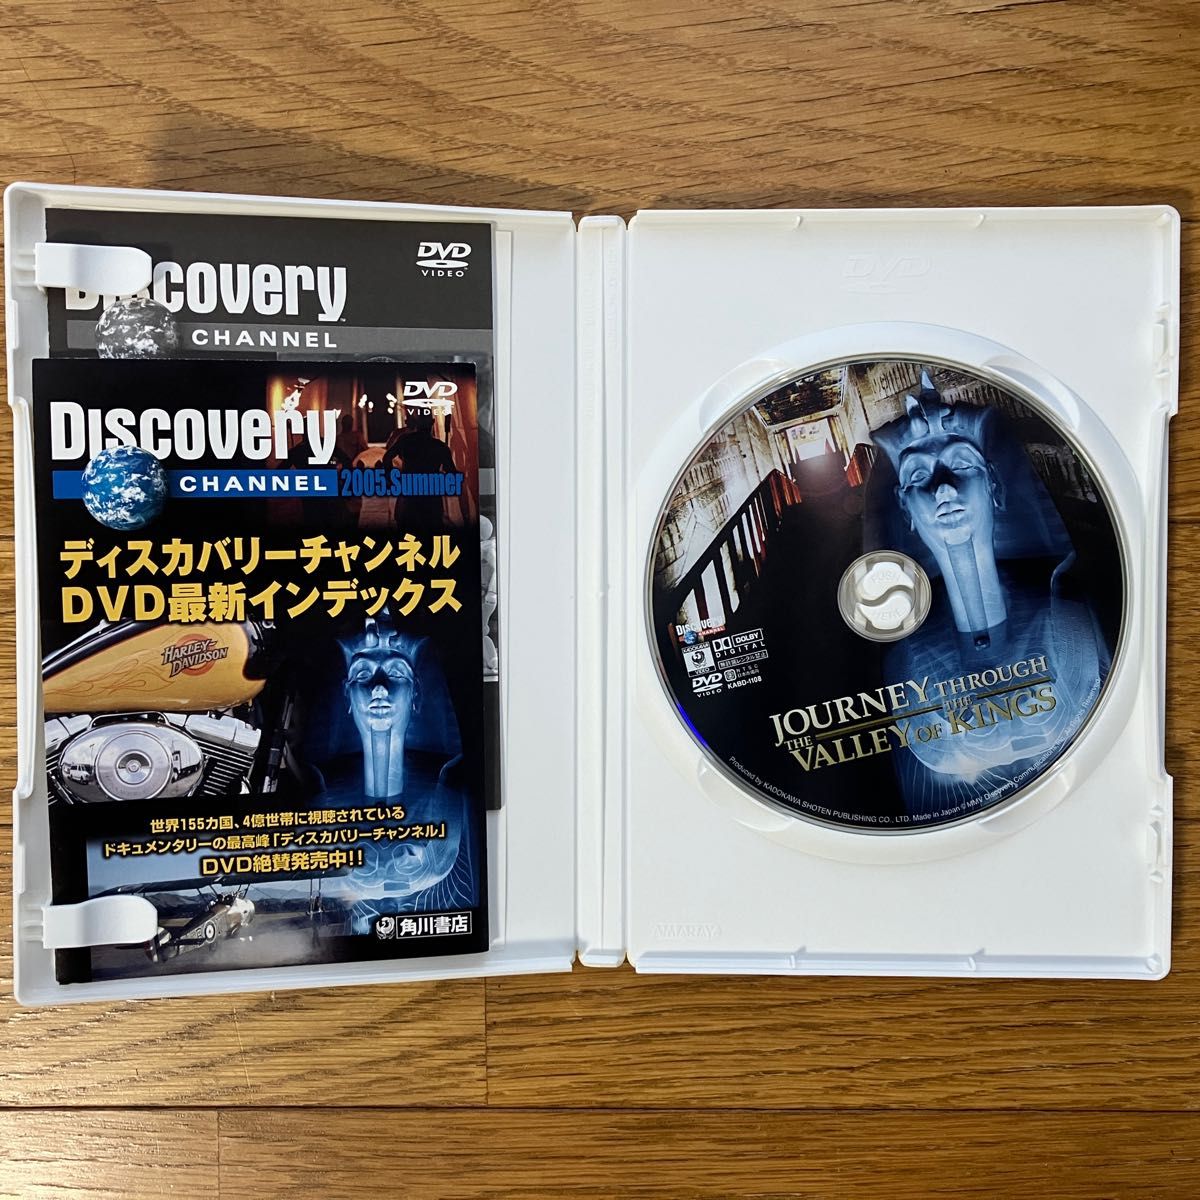 ＣＧで蘇る王家の谷  DVD  JOURNEY THROUGH THE VALLEY OF THE KINGS  角川書店